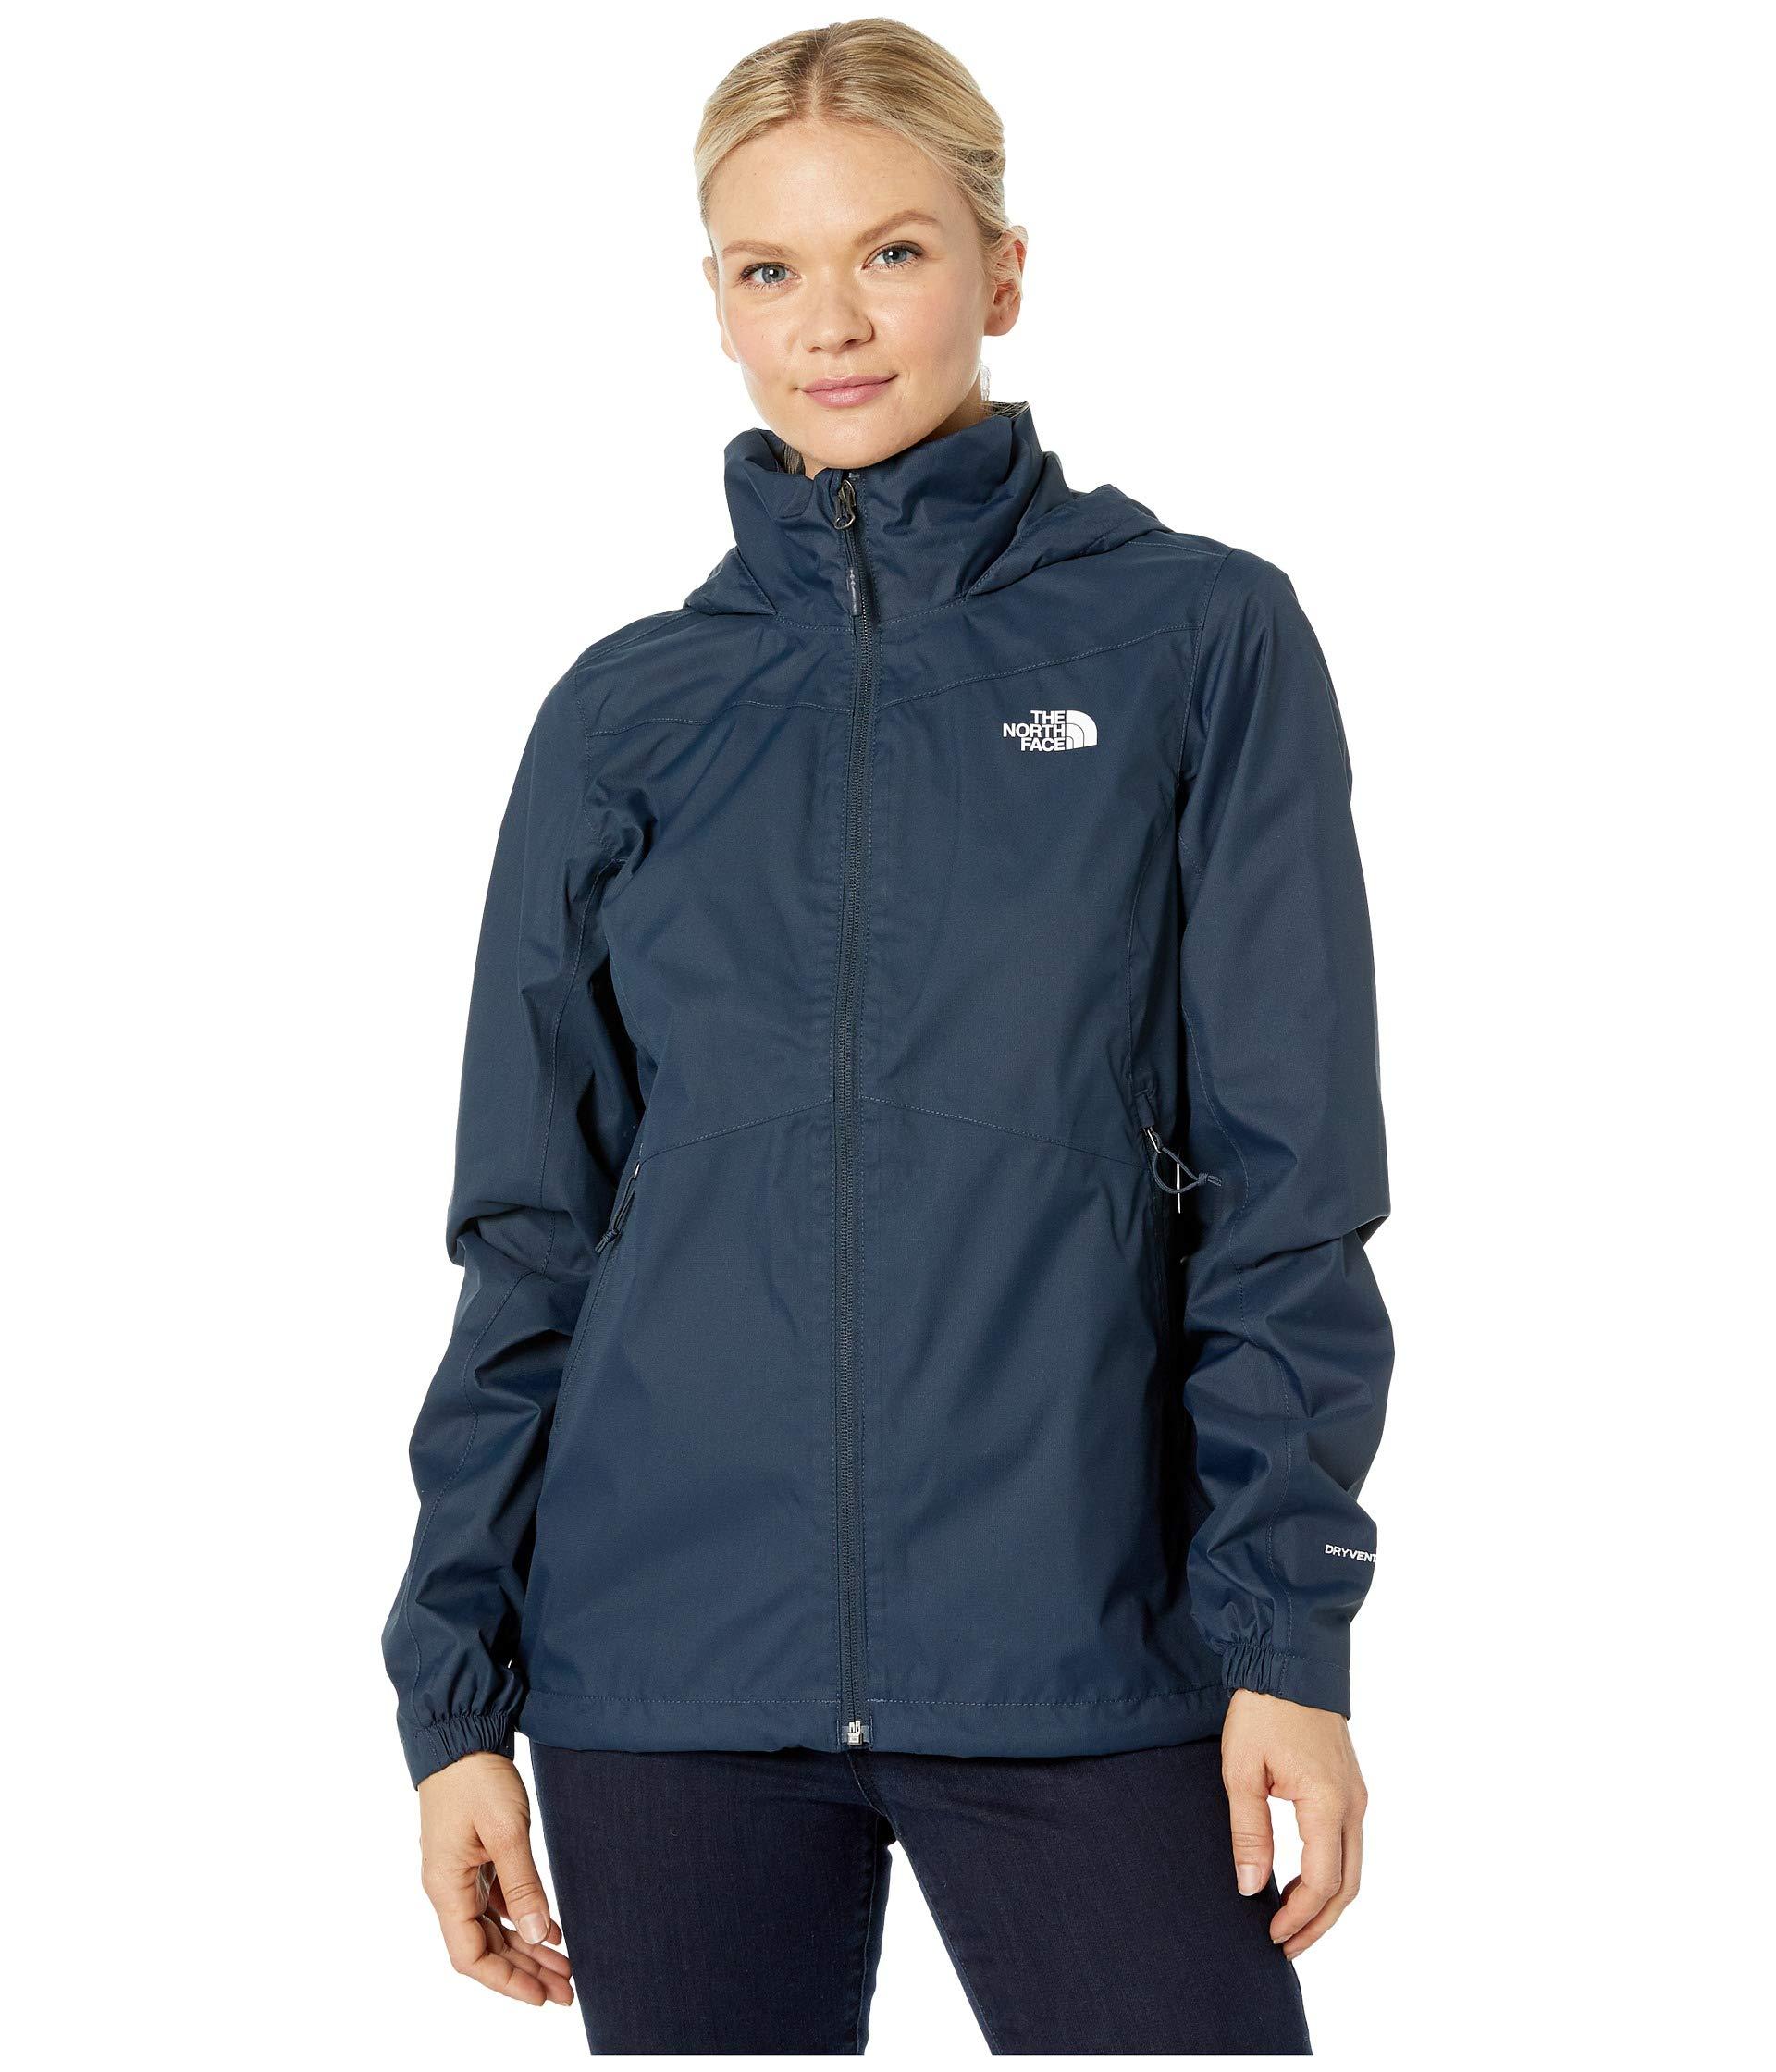 The North Face Synthetic Resolve Plus Jacket in Navy (Blue) - Lyst